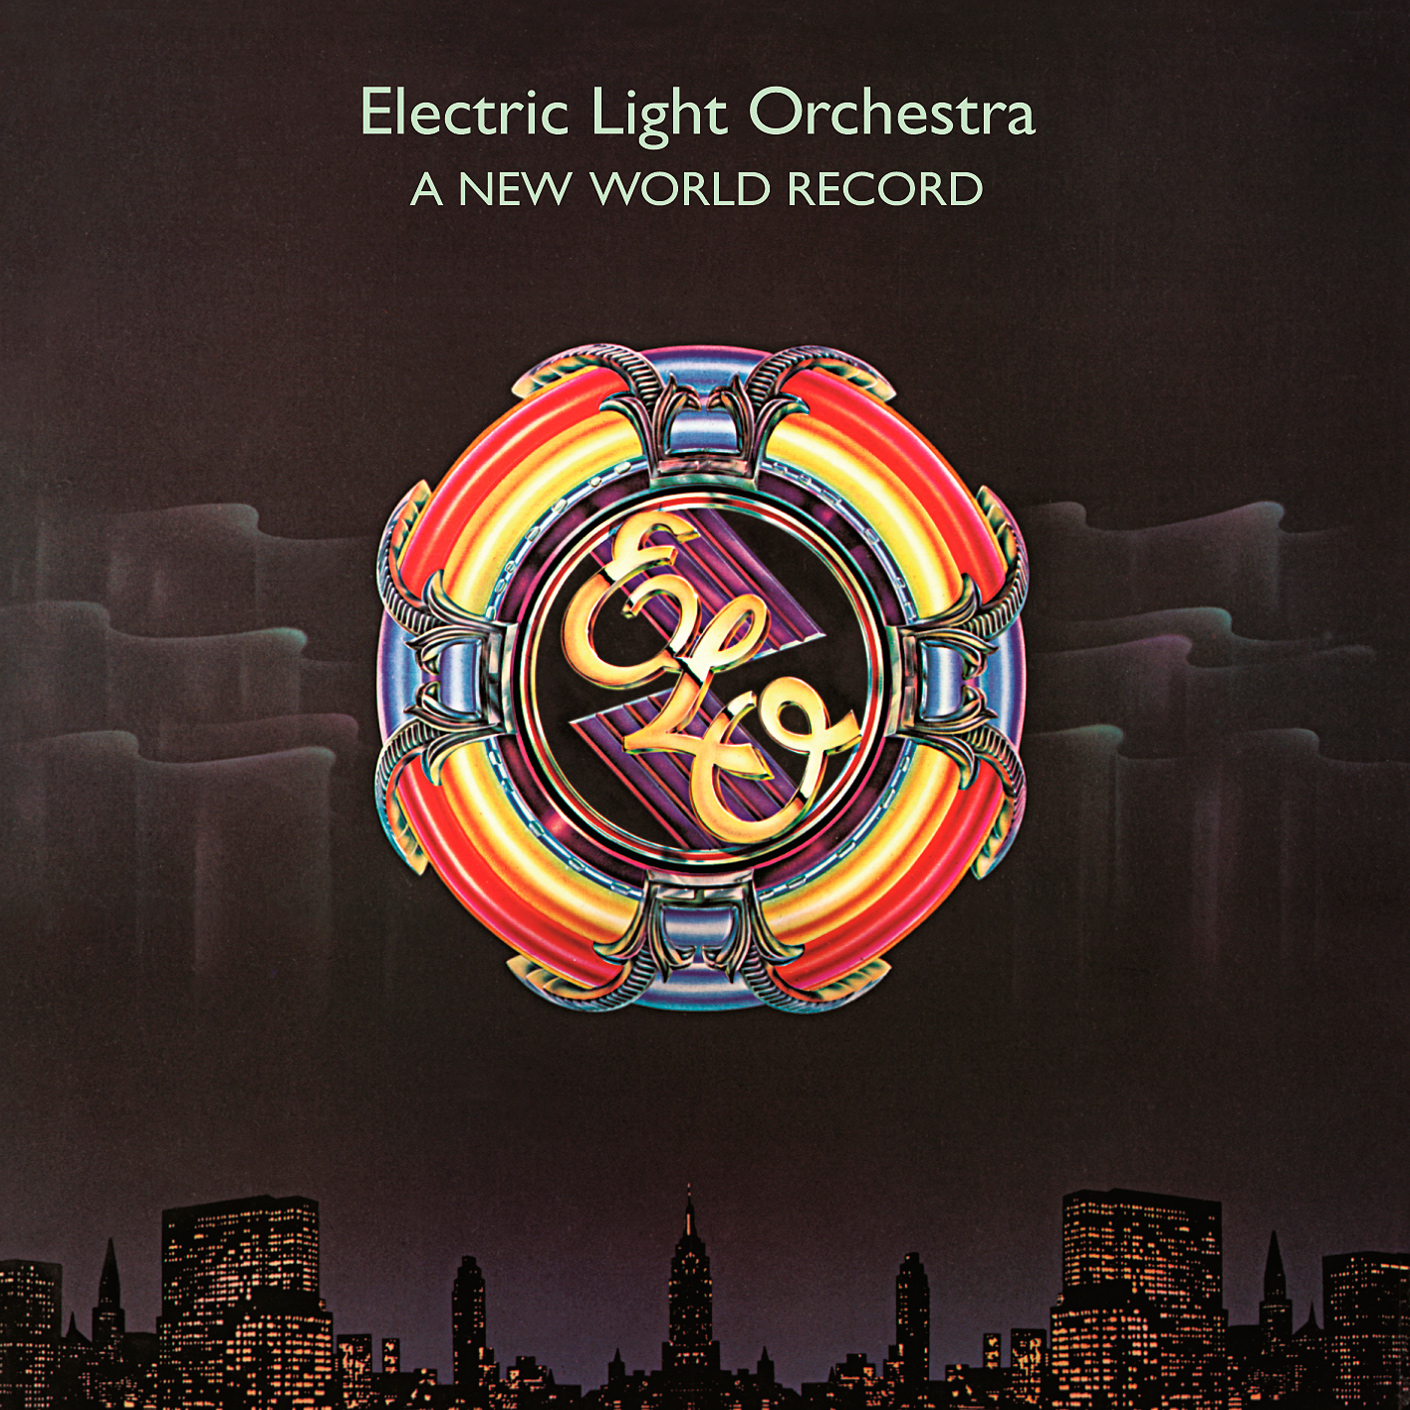 Electric Light Orchestra – A New World Record (1976/2015) [HDTracks FLAC 24bit/192kHz]